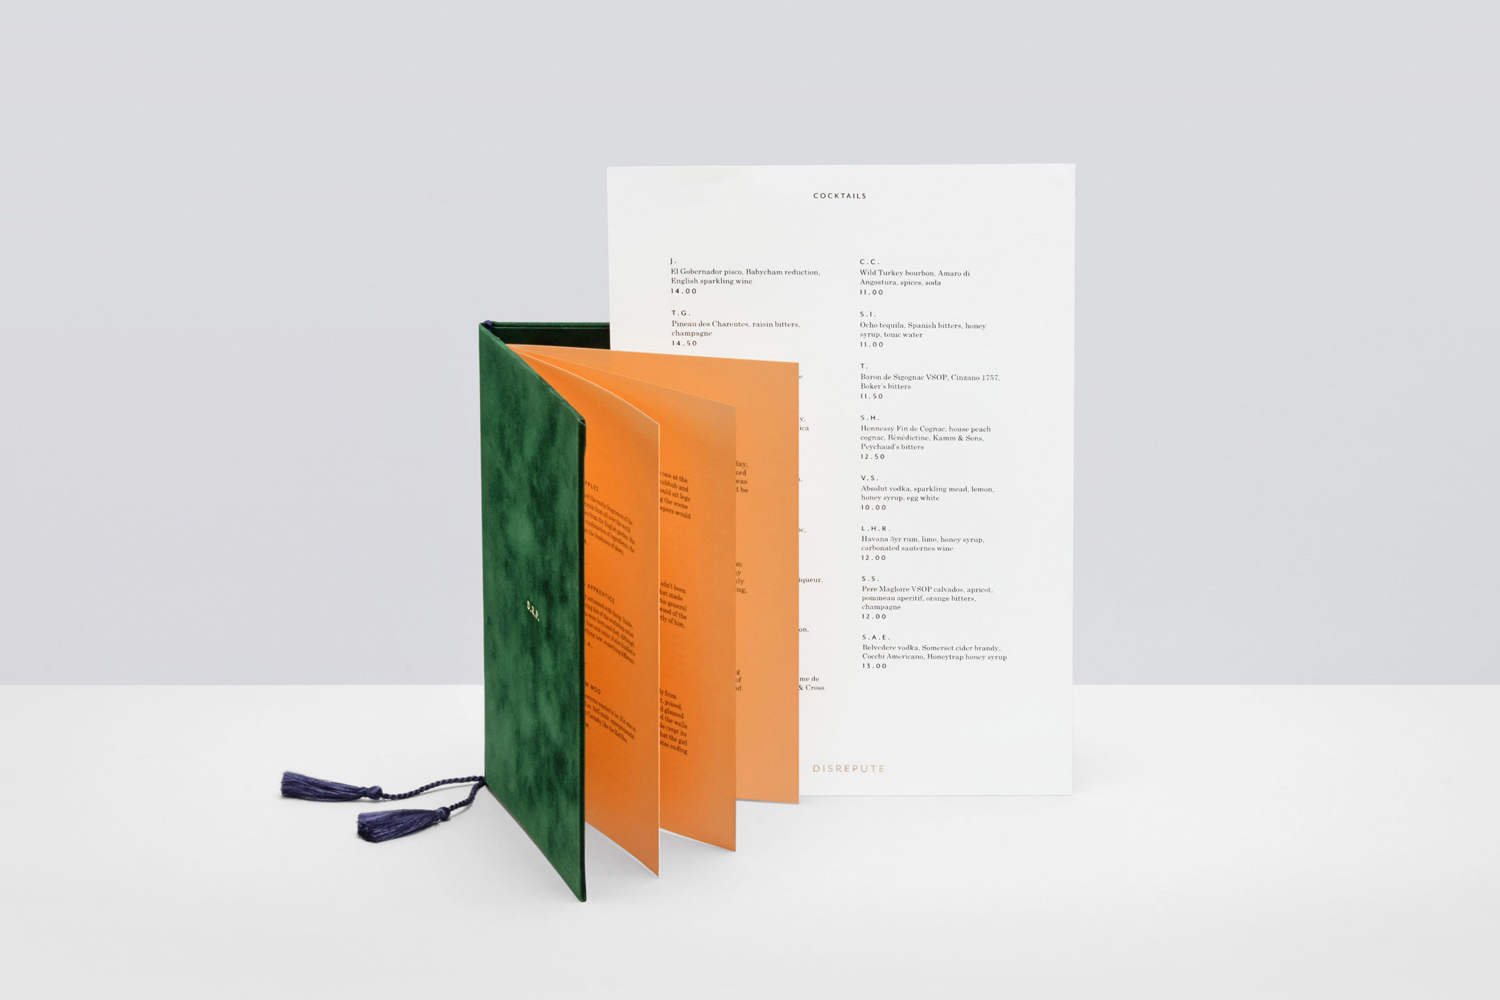 Brand identity and menu featuring Arjowiggins Pop’set Apricot designed by London-based studio Two Times Elliott for Soho members bar Disrepute